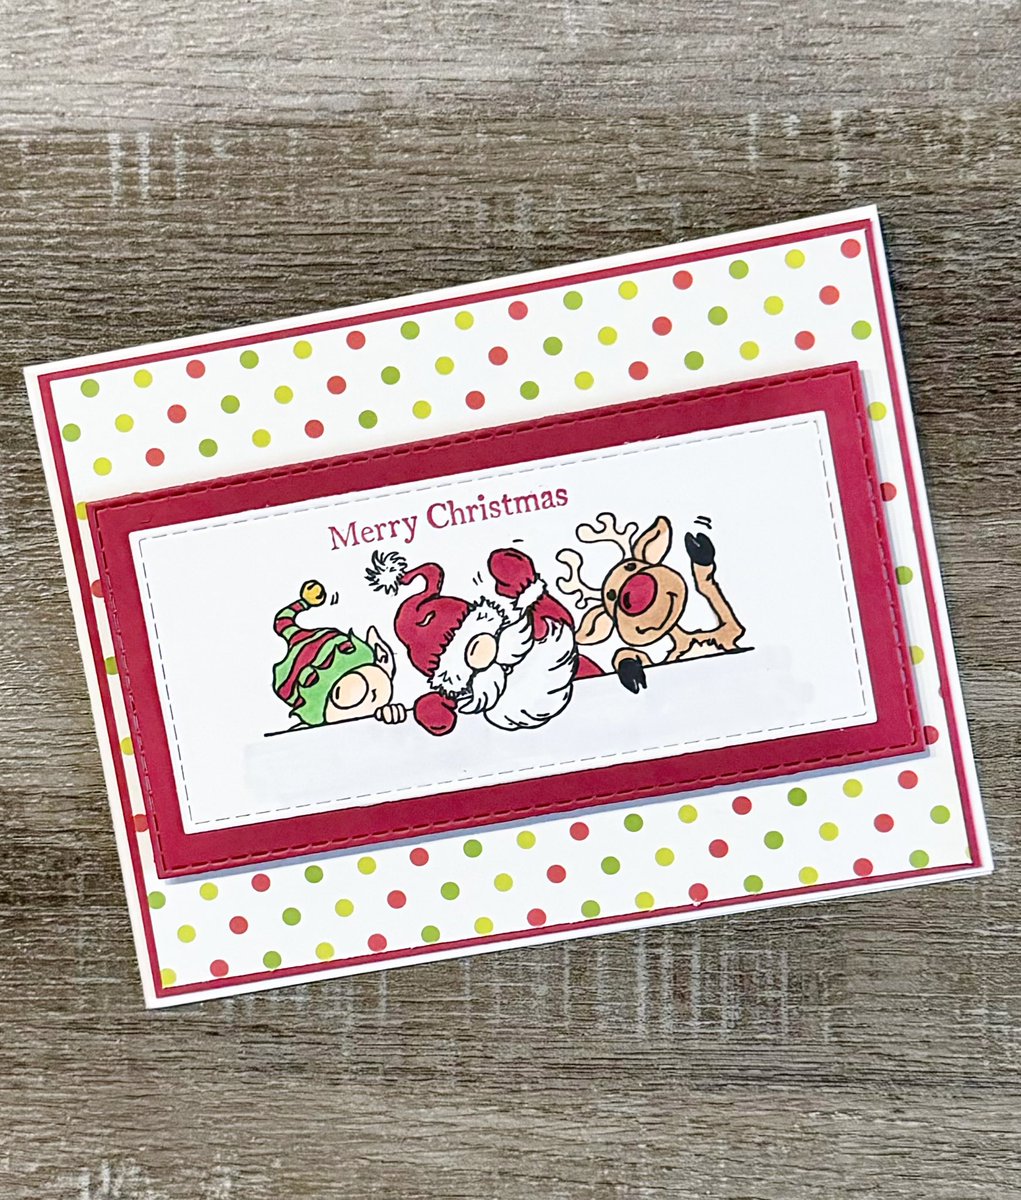 Merry Christmas from the Christmas Crew! Join me in building your card stash for the holidays.🎄
#creatingme #unitystampco #byshcsketchchallenge44 #cards #cardmaking #cardmakersofinstagram #rubberstamping #christmascards #christmascardideas

creatingme.net/2024/04/19/chr…